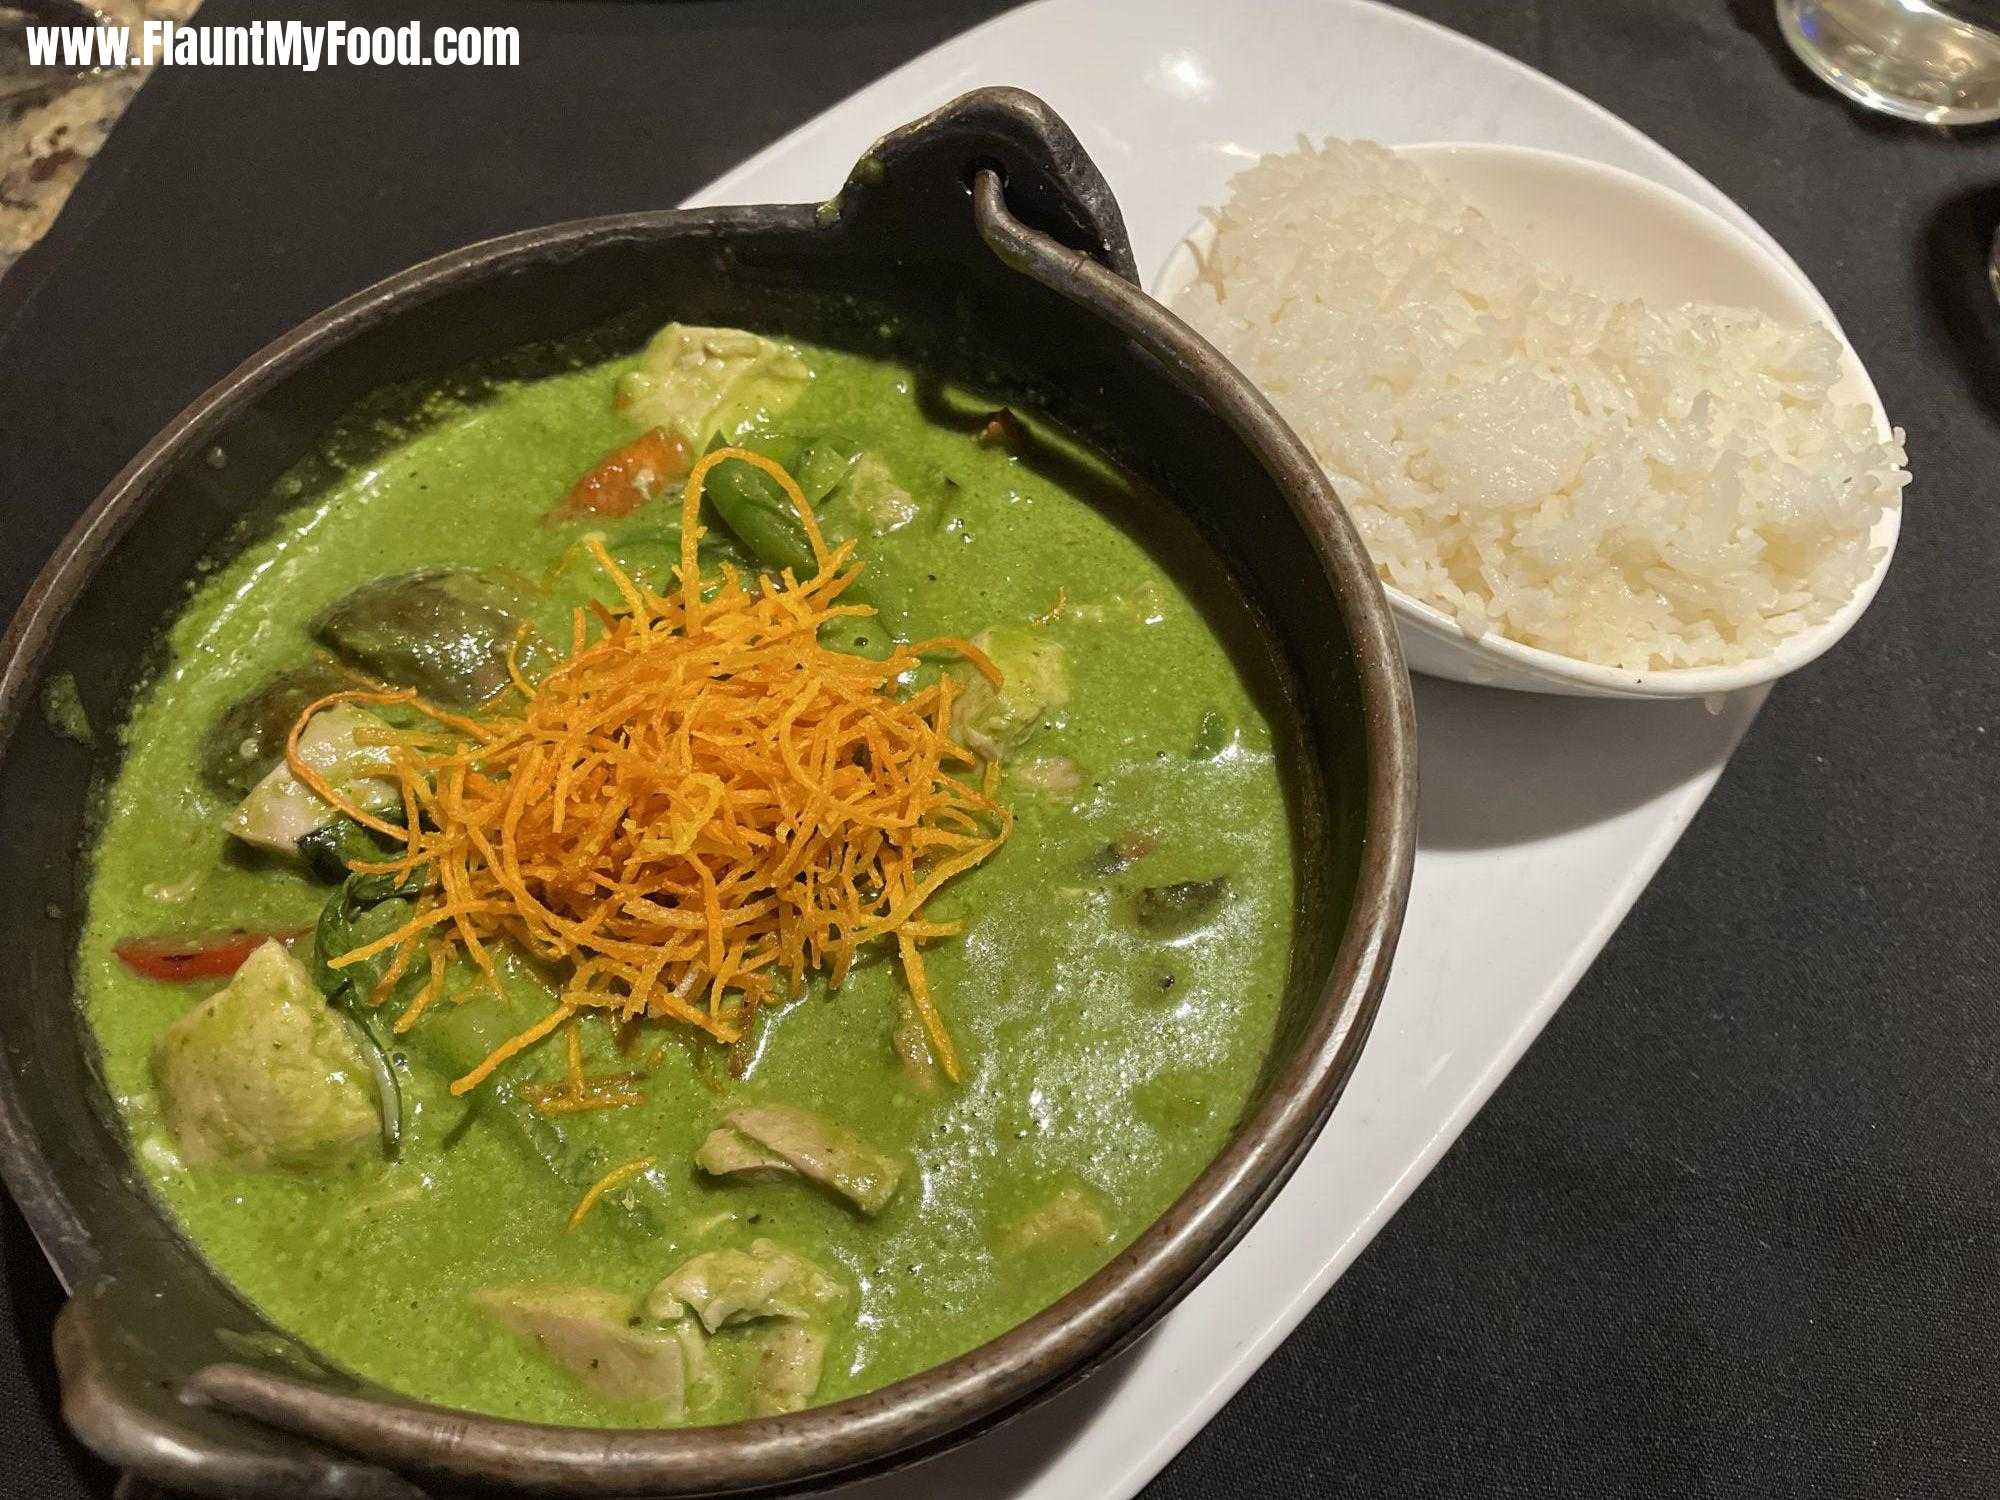 Iron pot, green curry, chickenMalai in Clearfork Fort Worth Texas. Scratch made green curry stew with chicken, Thai, eggplant, crispy carrots, and choice of jasmine rice, brown rice, or rice noodles on the side.